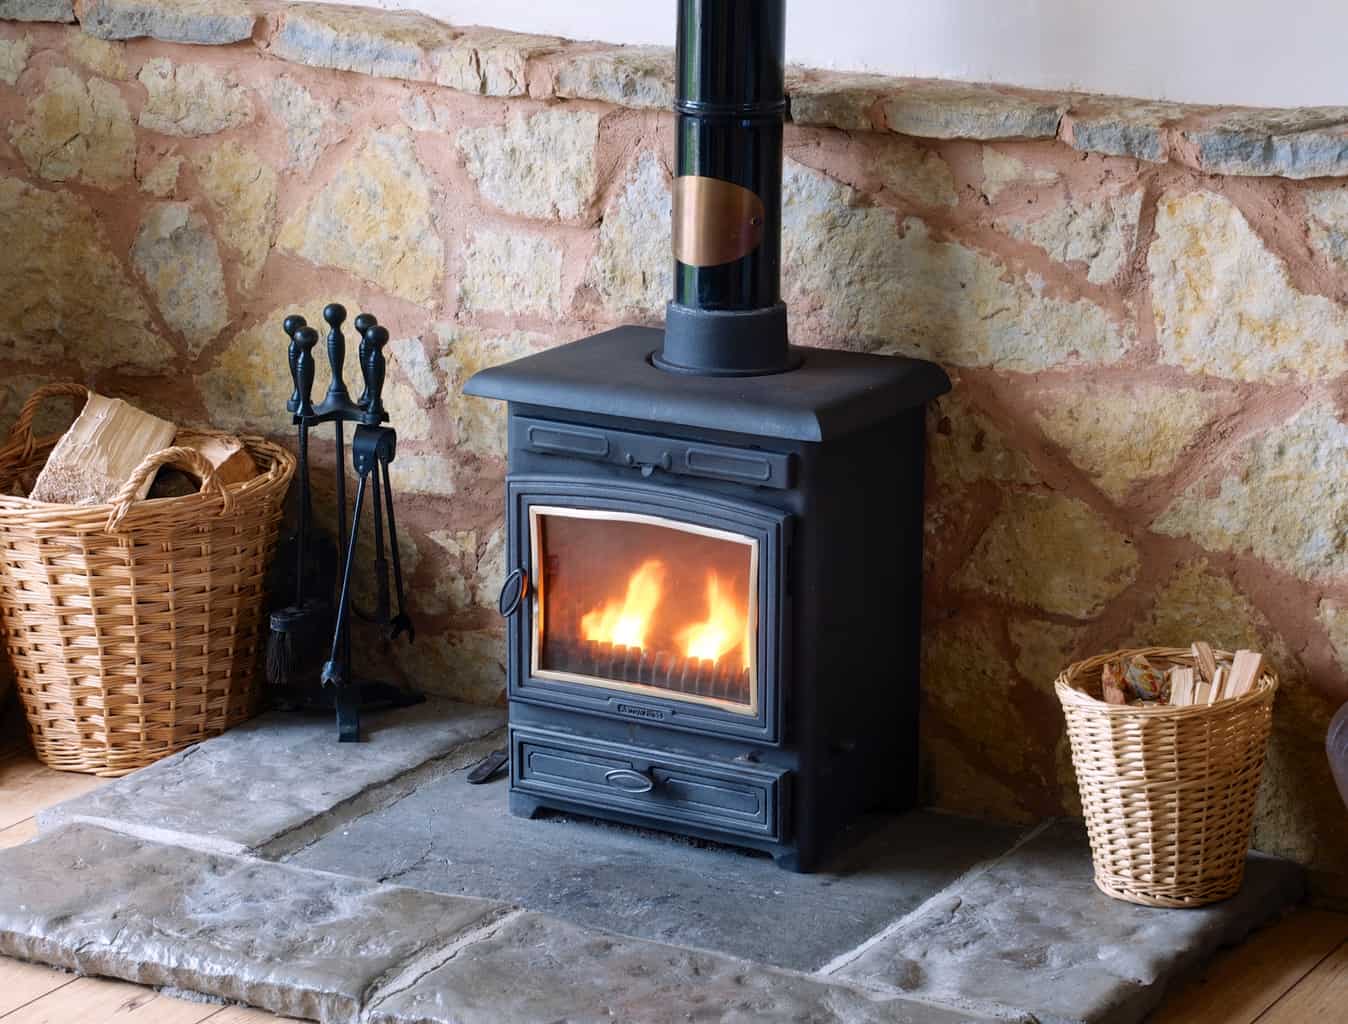 Coshes garden wood burner at the cottage to keep guests warm